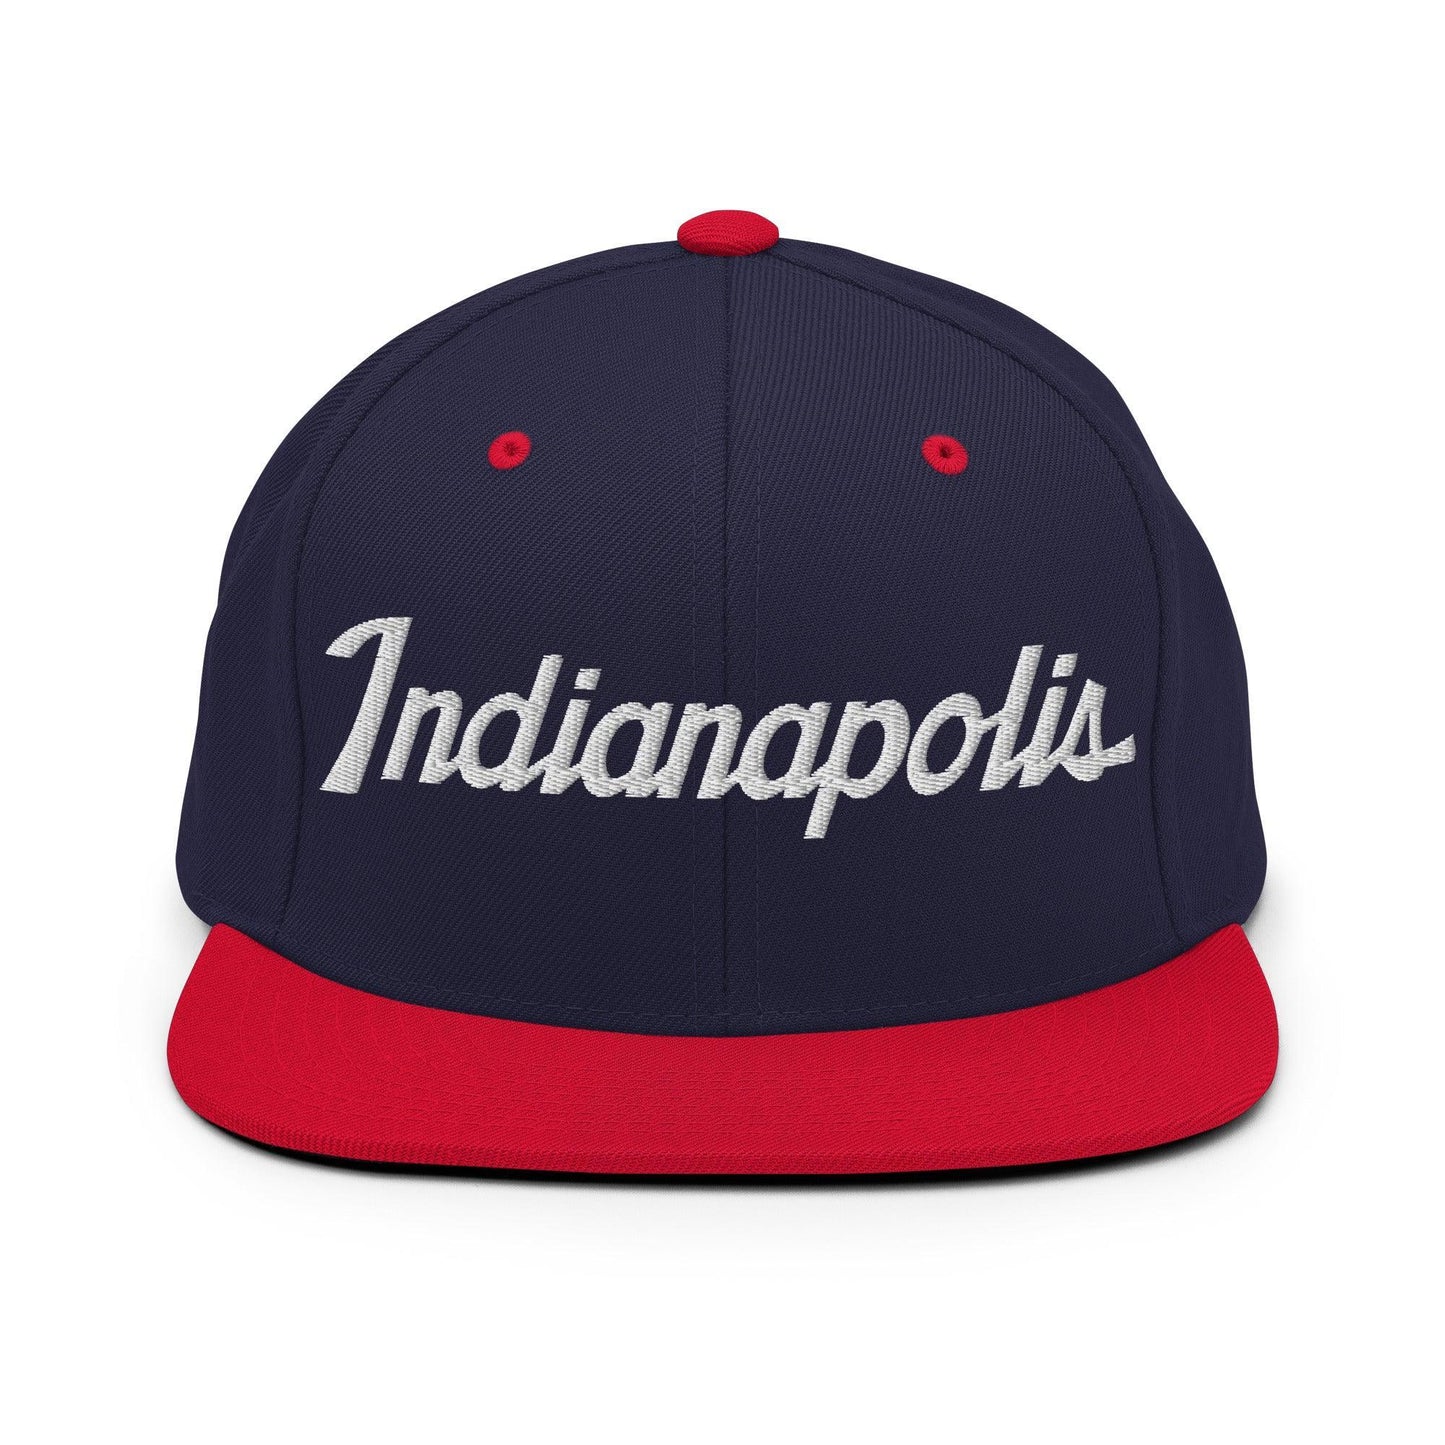 Indianapolis Script Snapback Hat Navy/ Red